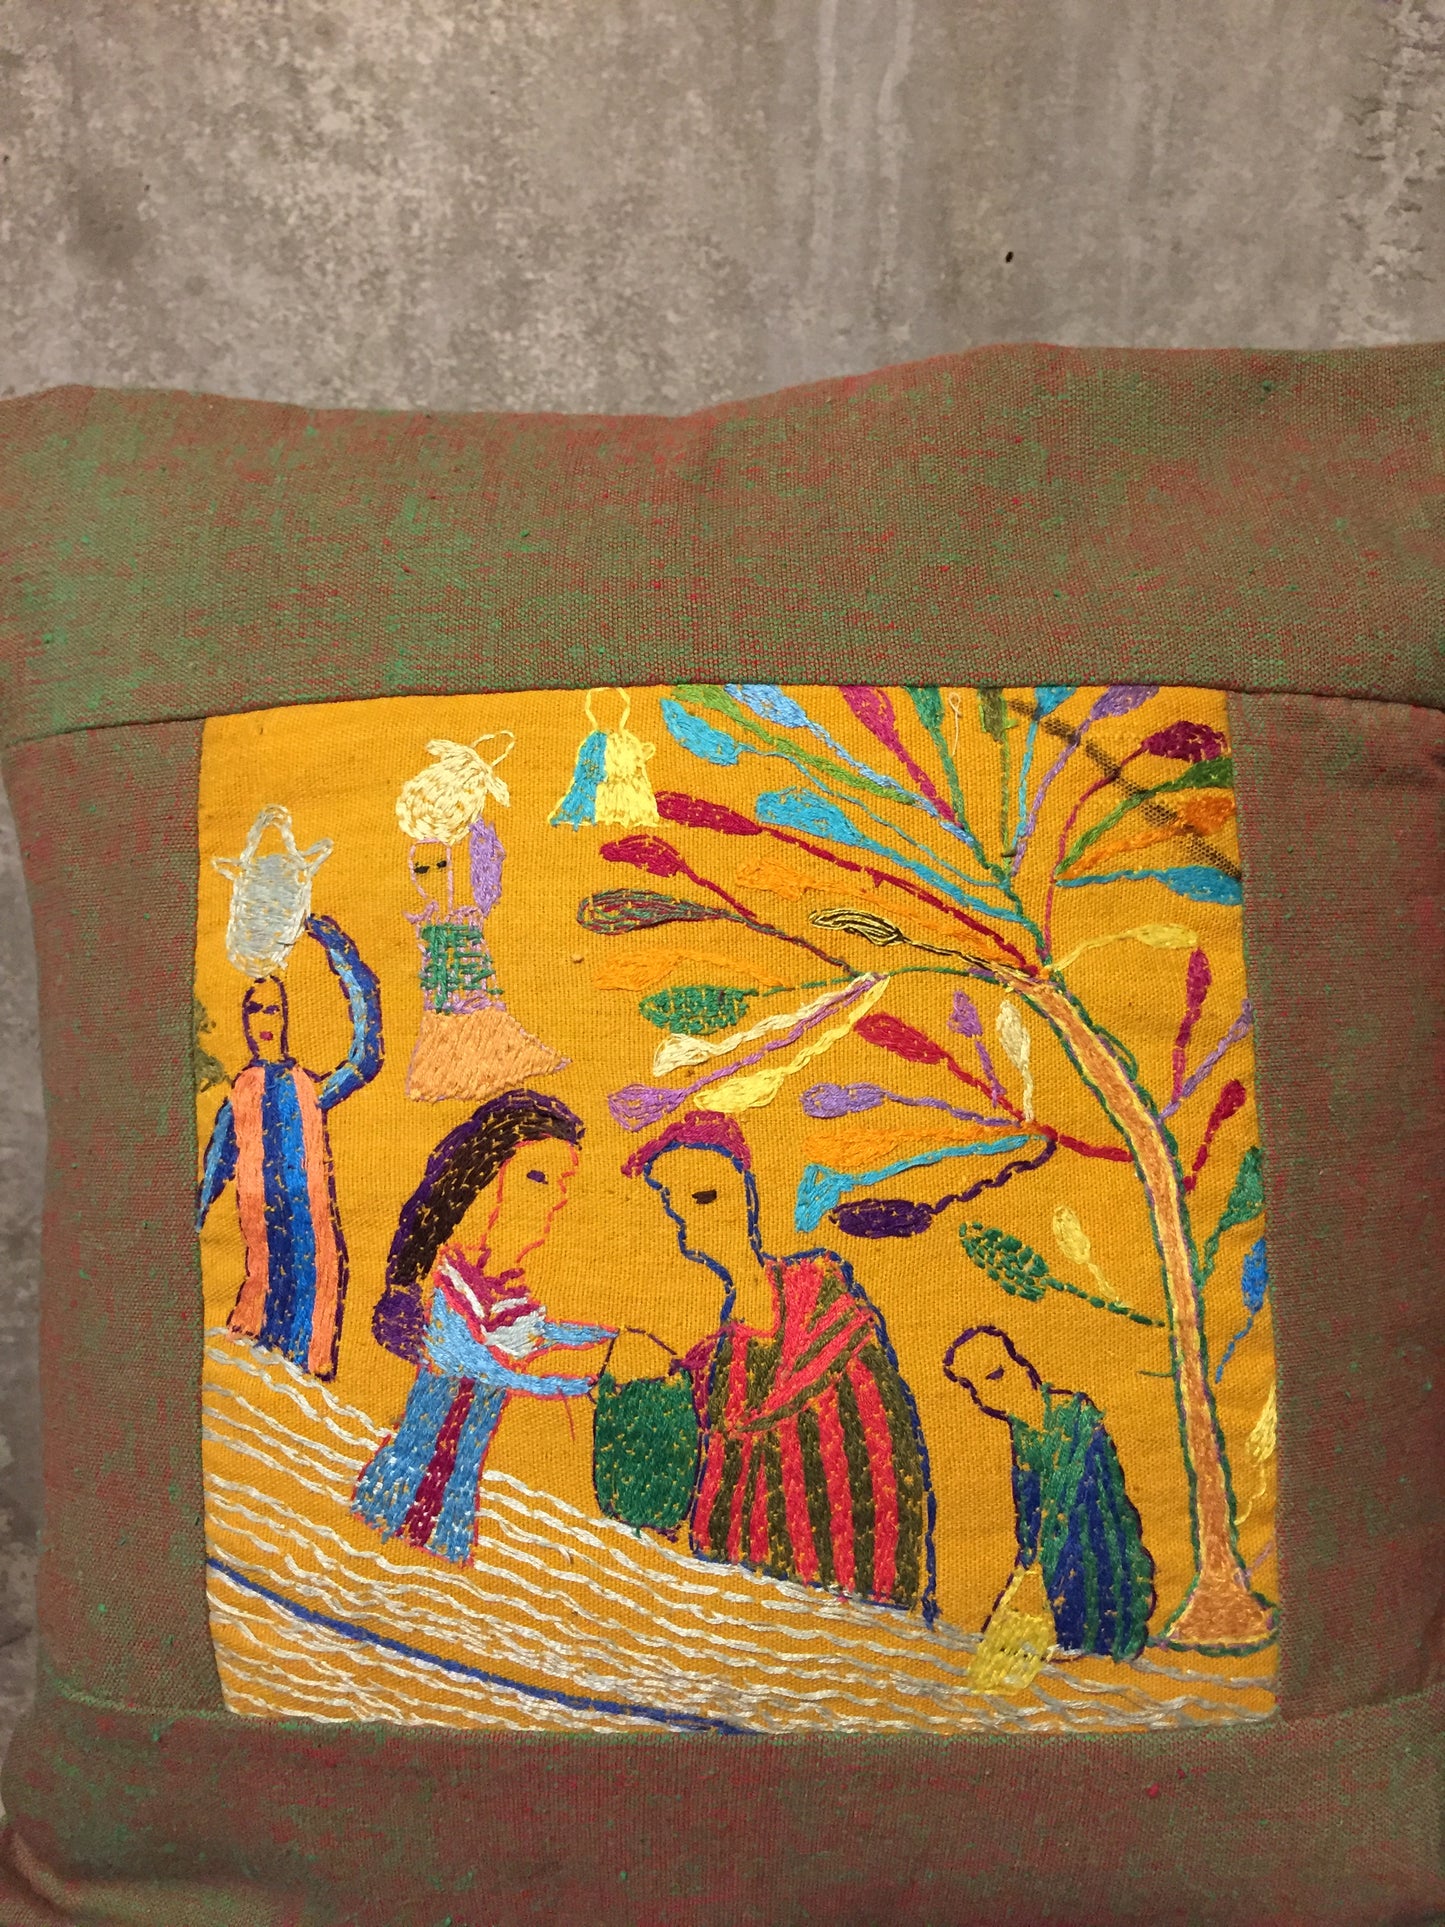 Handwoven Egyptian Cotton Cushion Cover - Hand Embroidered Art - The Harvest